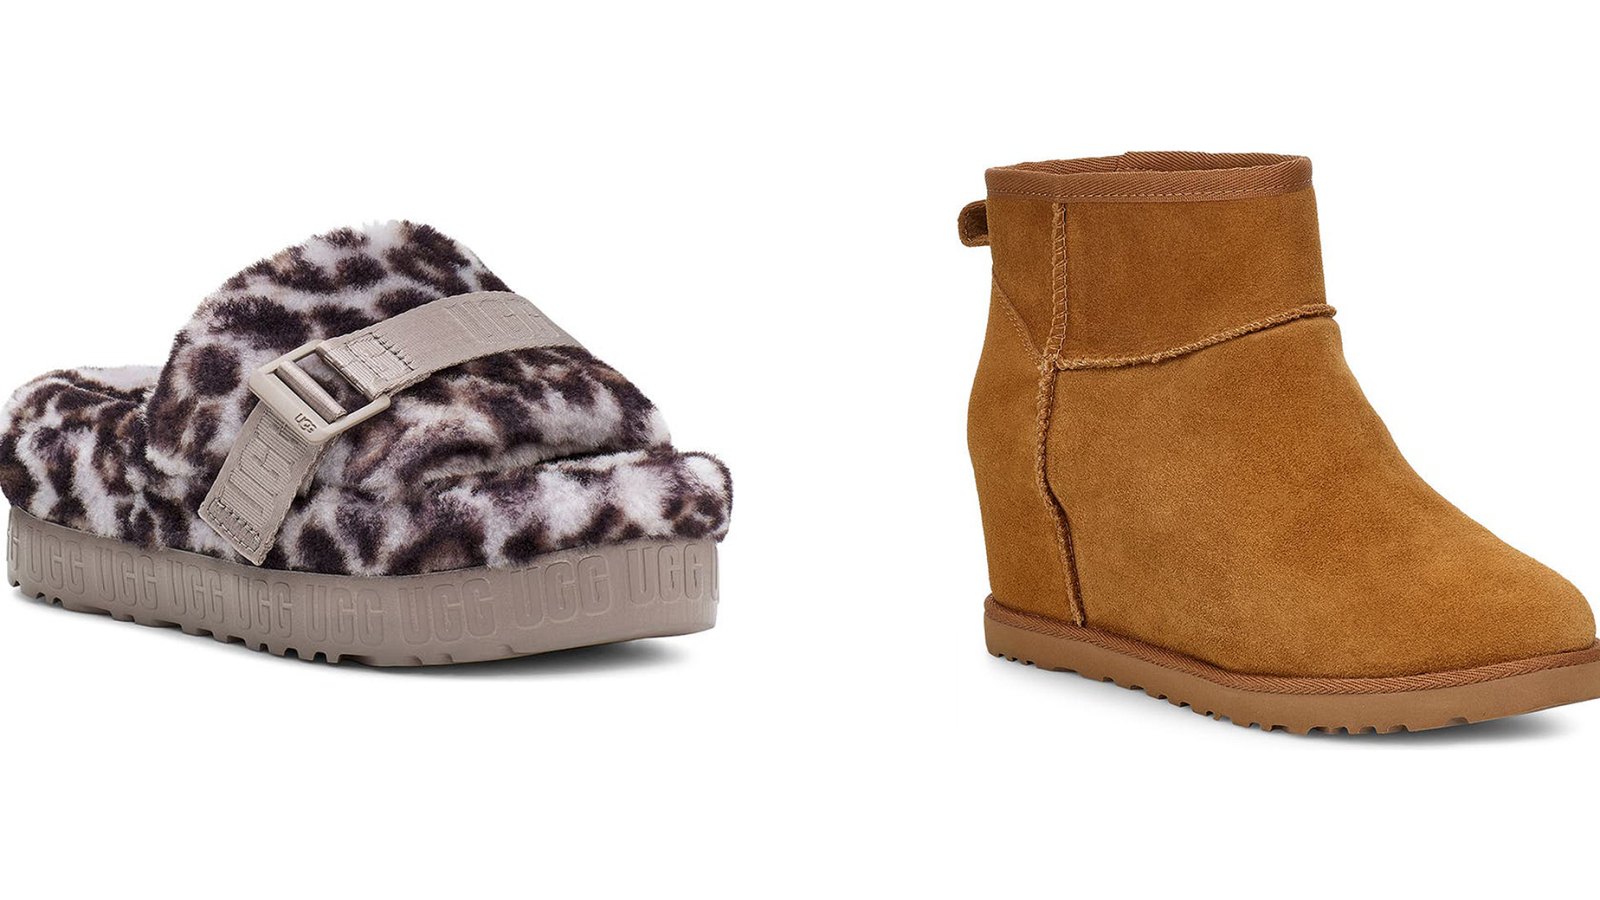 Verdorie Bedrijfsomschrijving verzoek UGG Boots and Shoes Newly Marked-Down at Nordstrom — Shop Fast